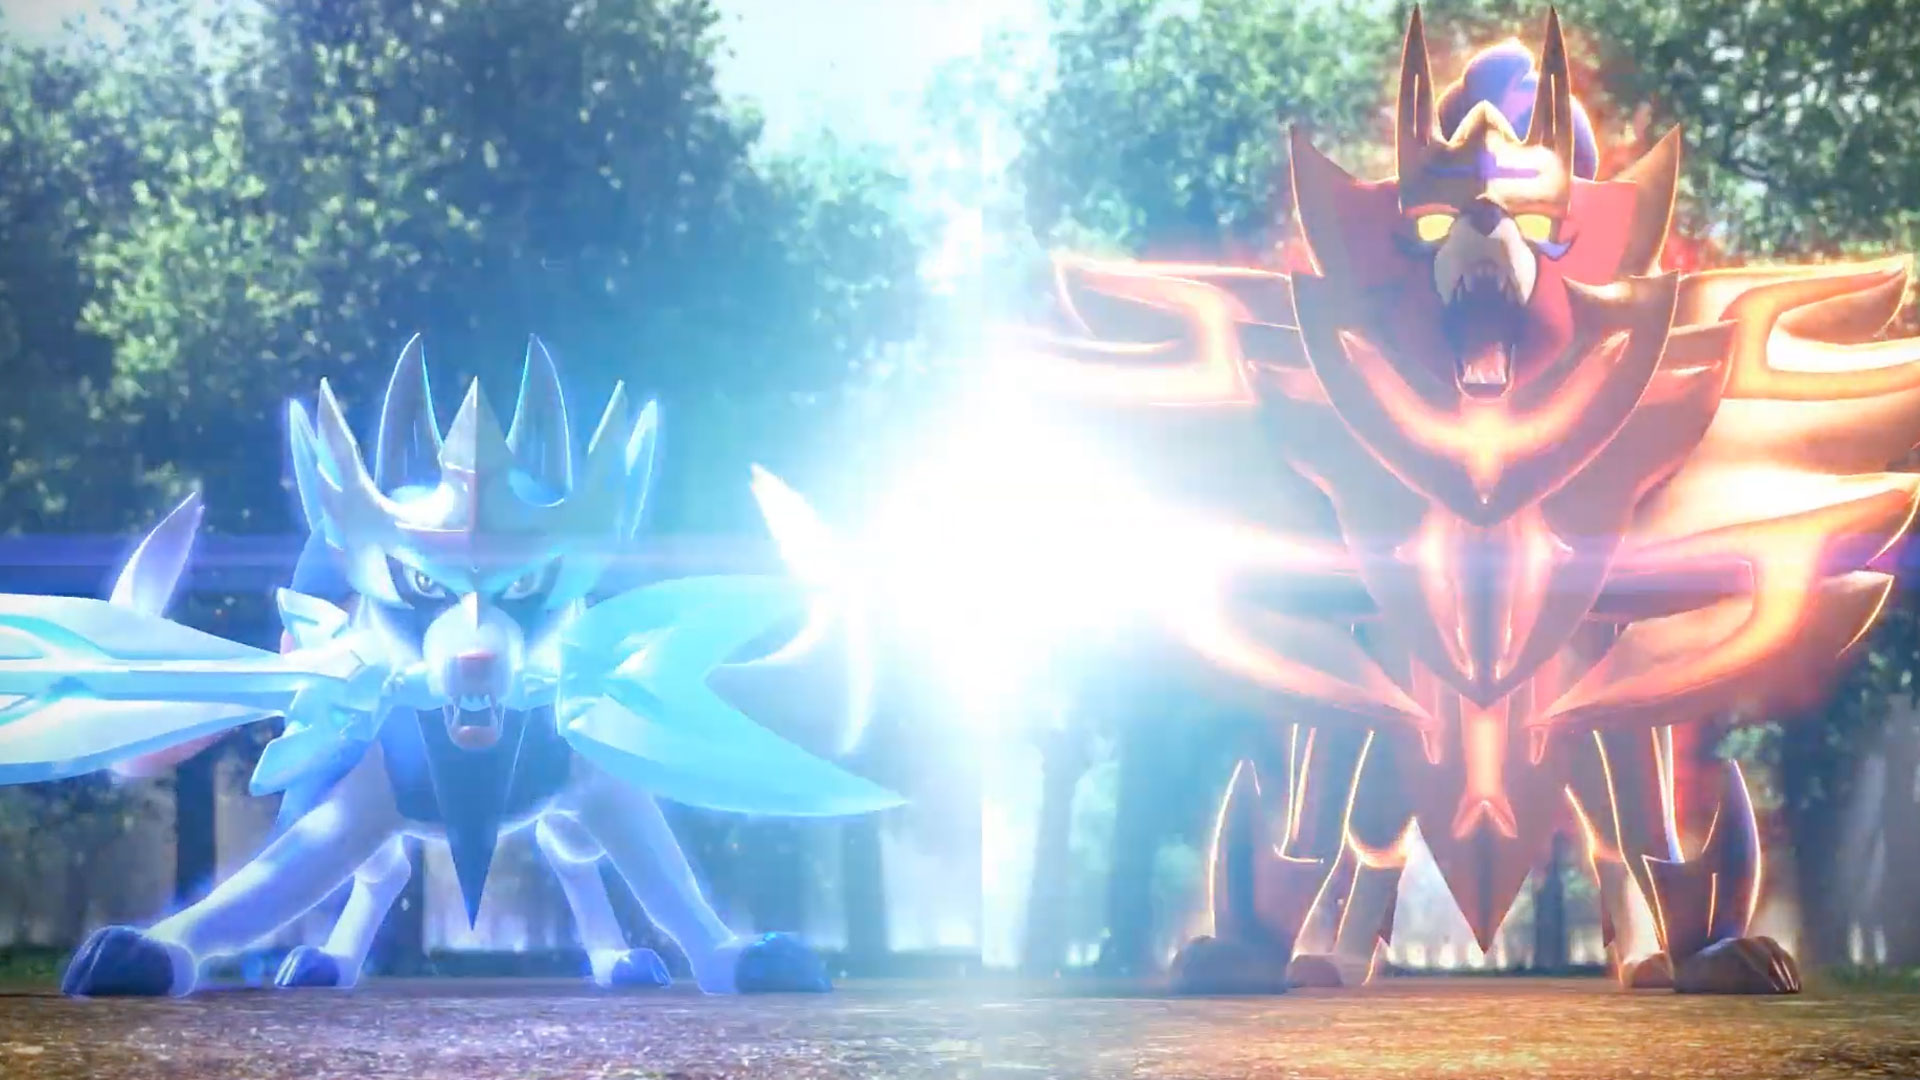 Pokemon Sword and Shield Gigantamax feature confirmed in a new trailer along with more Pokemon and gym leaders